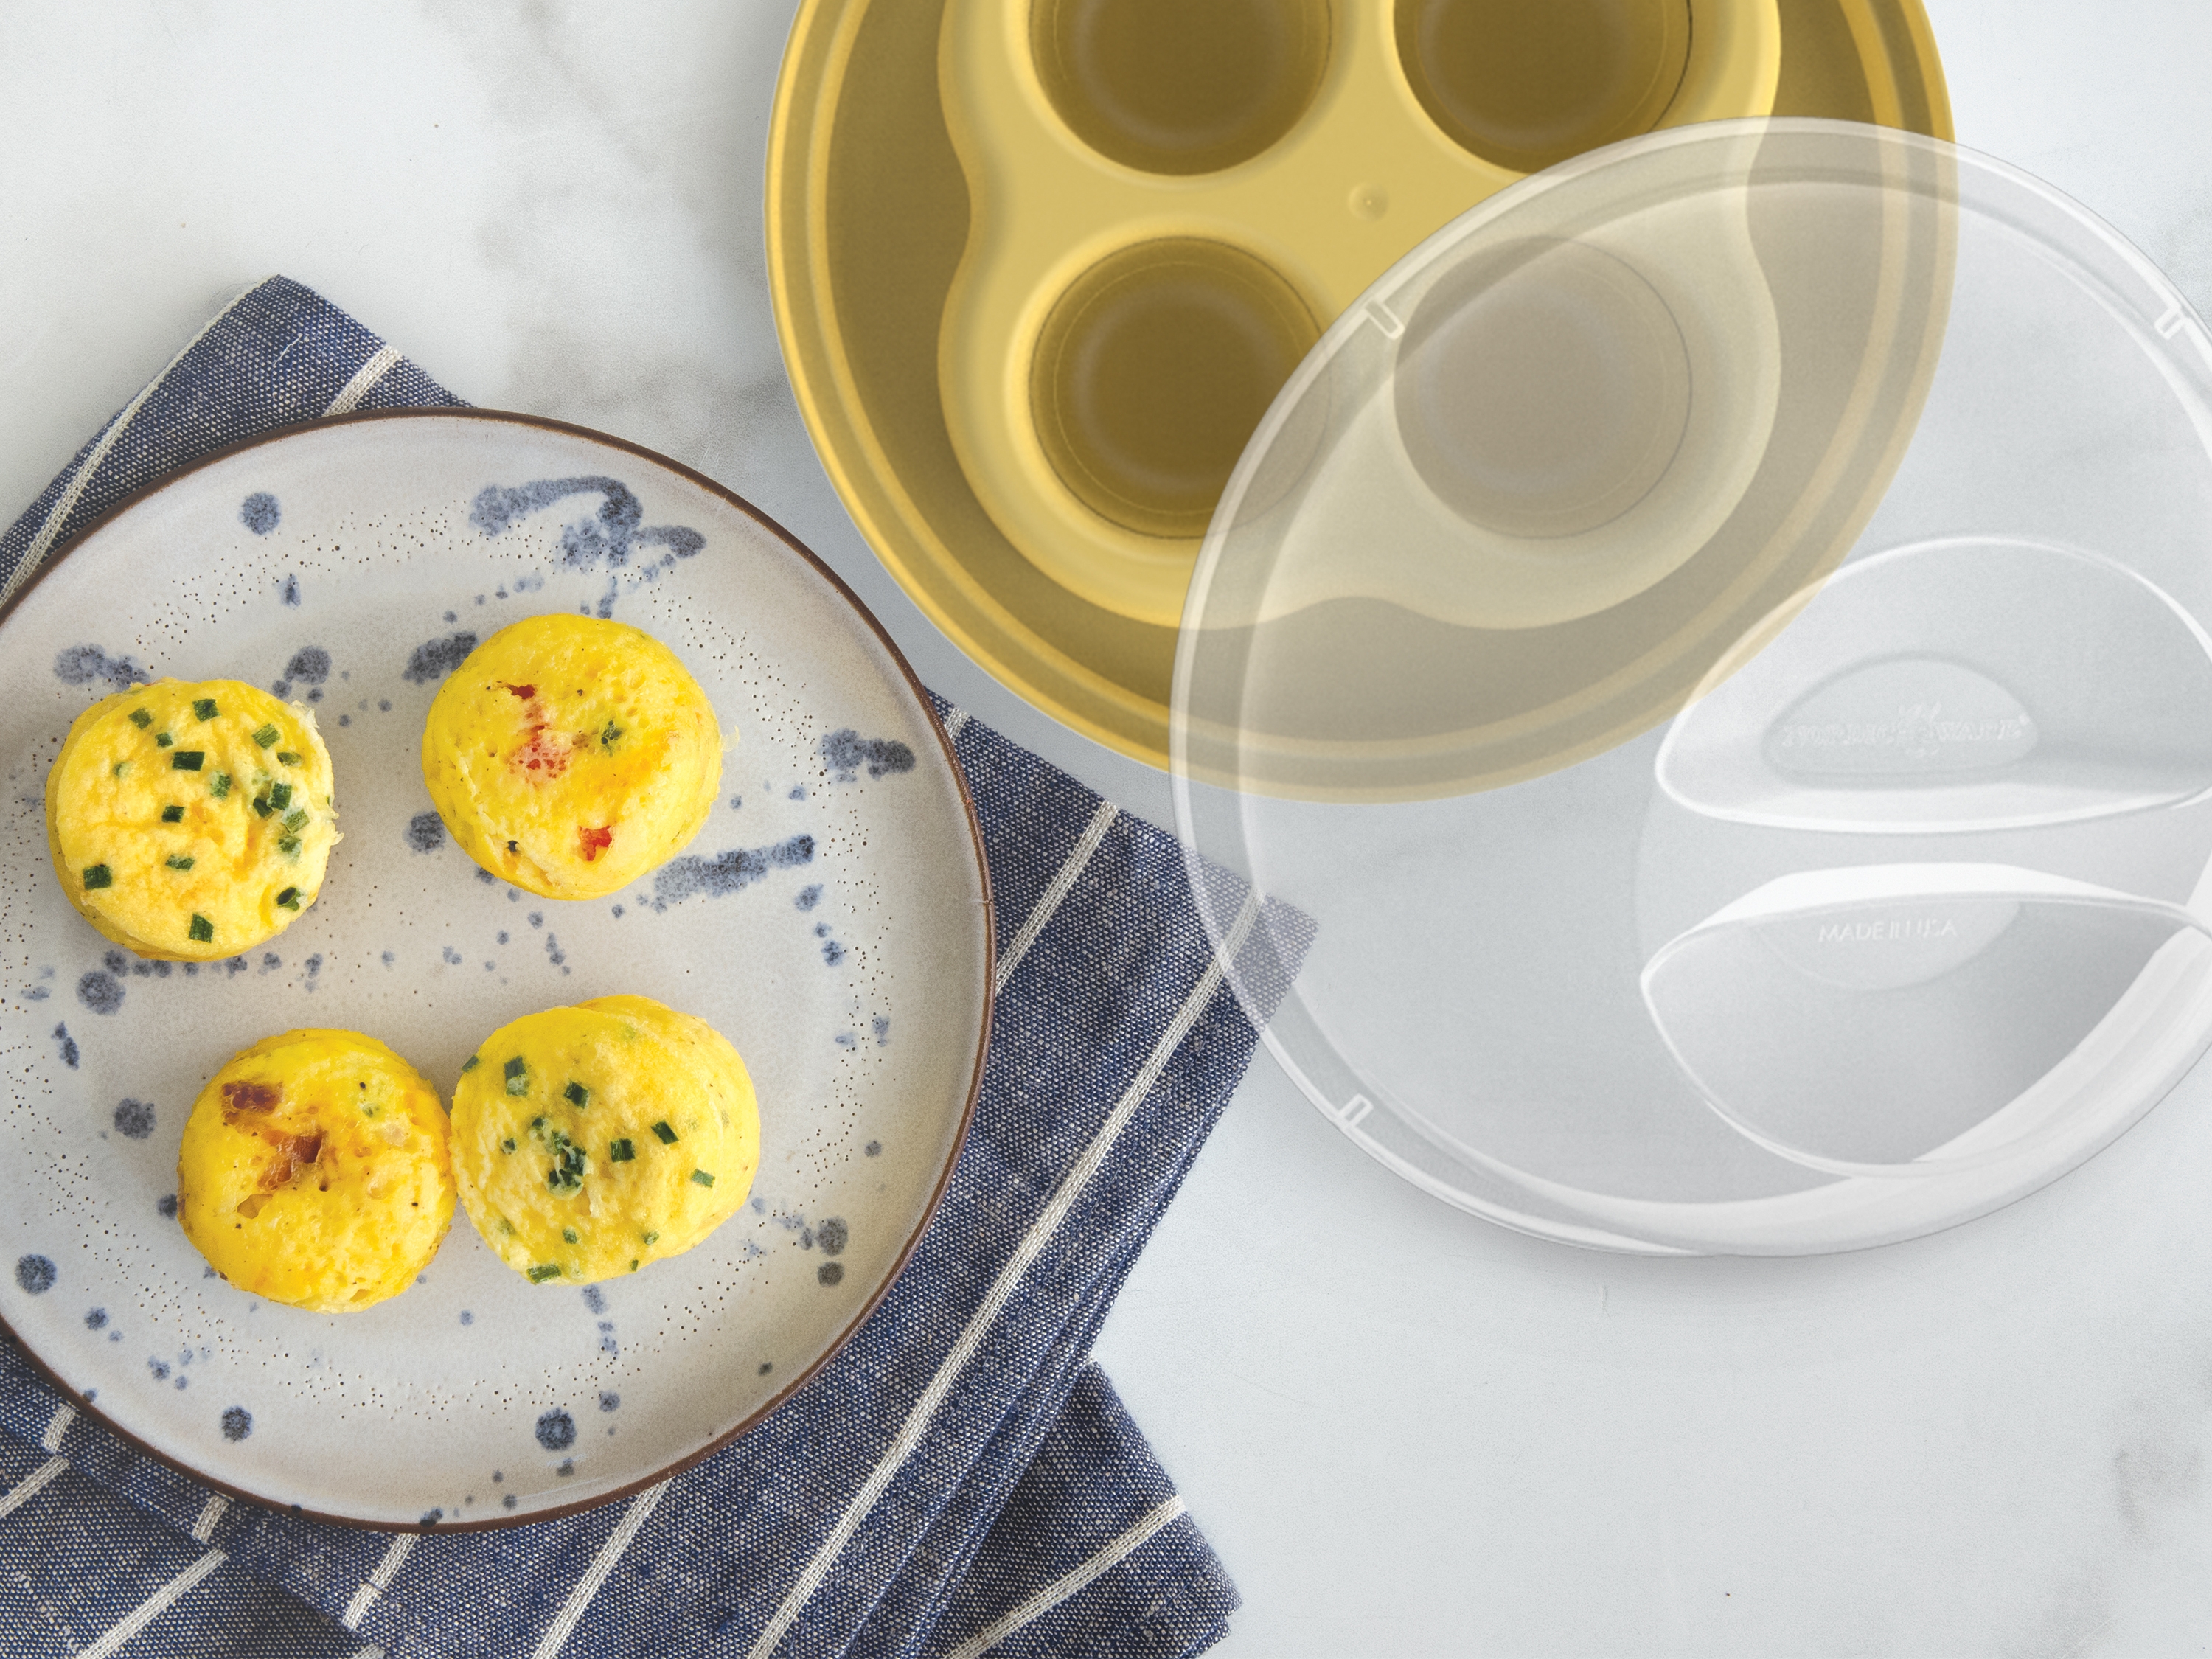 Make the Perfect Egg Bites at Home With This $20 Pan